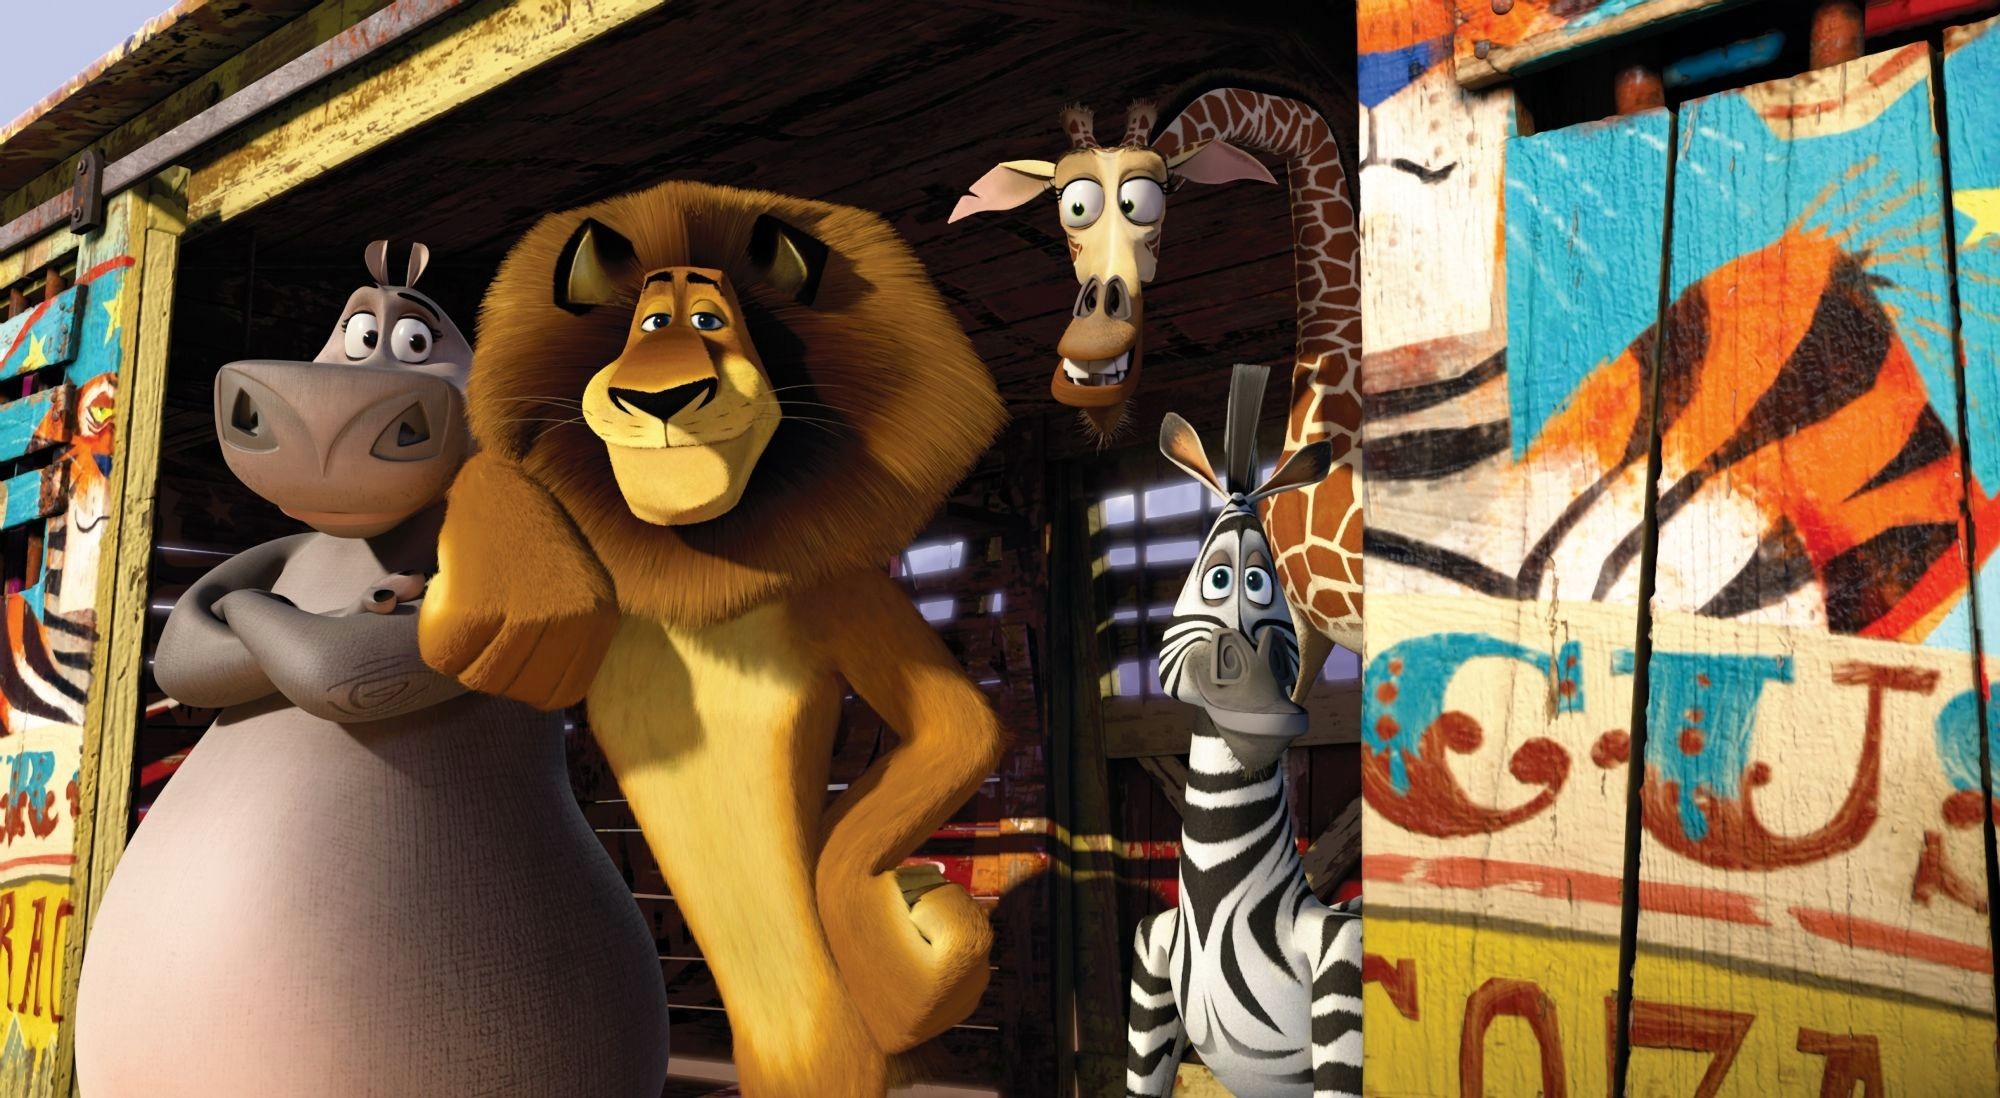 Gloria the Hippo, Alex the Lion, Melman the Giraffe and Marty the Zebra of DreamWorks Animation's Madagascar 3: Europe's Most Wanted (2012)